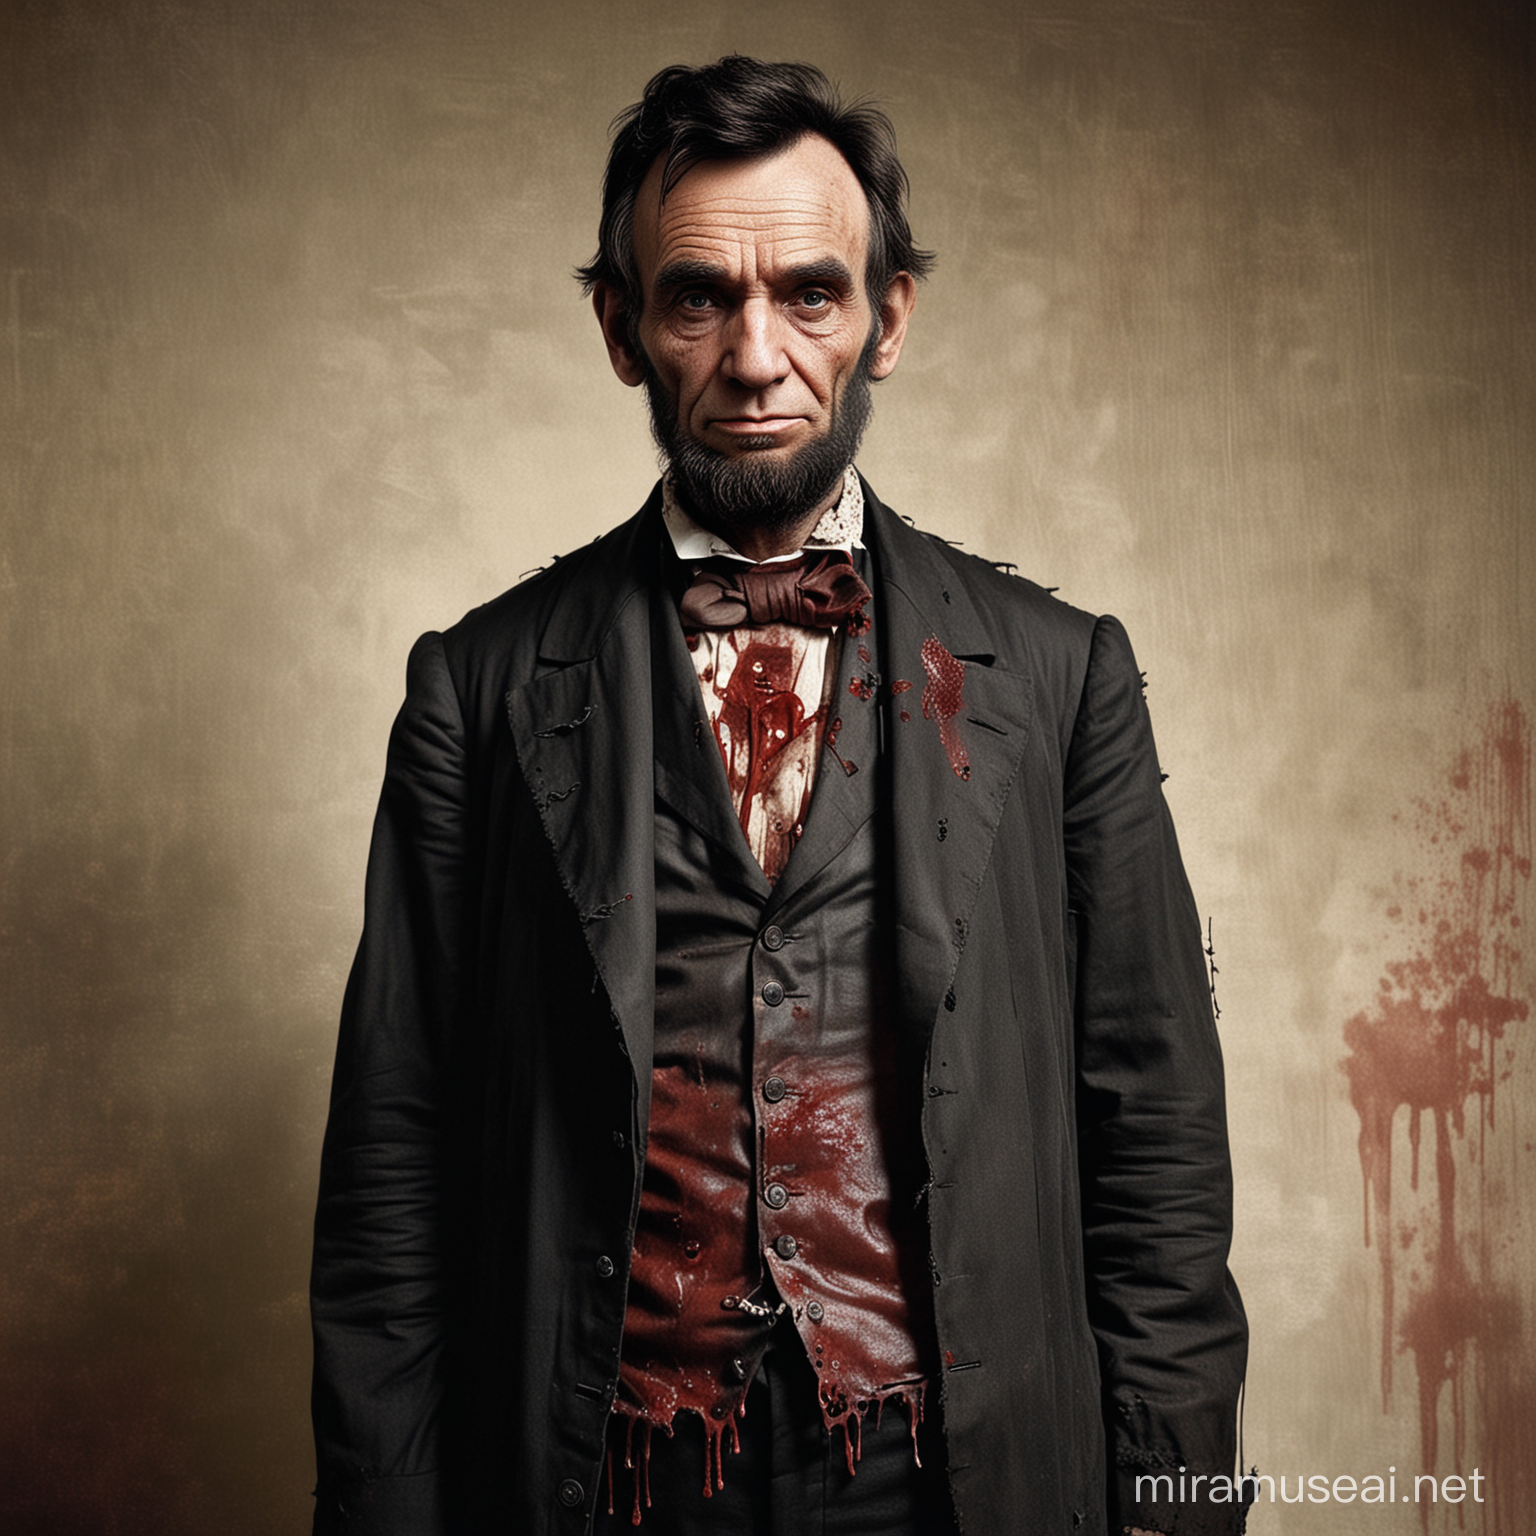 Abraham Lincoln wearing tattered and bloody clothes